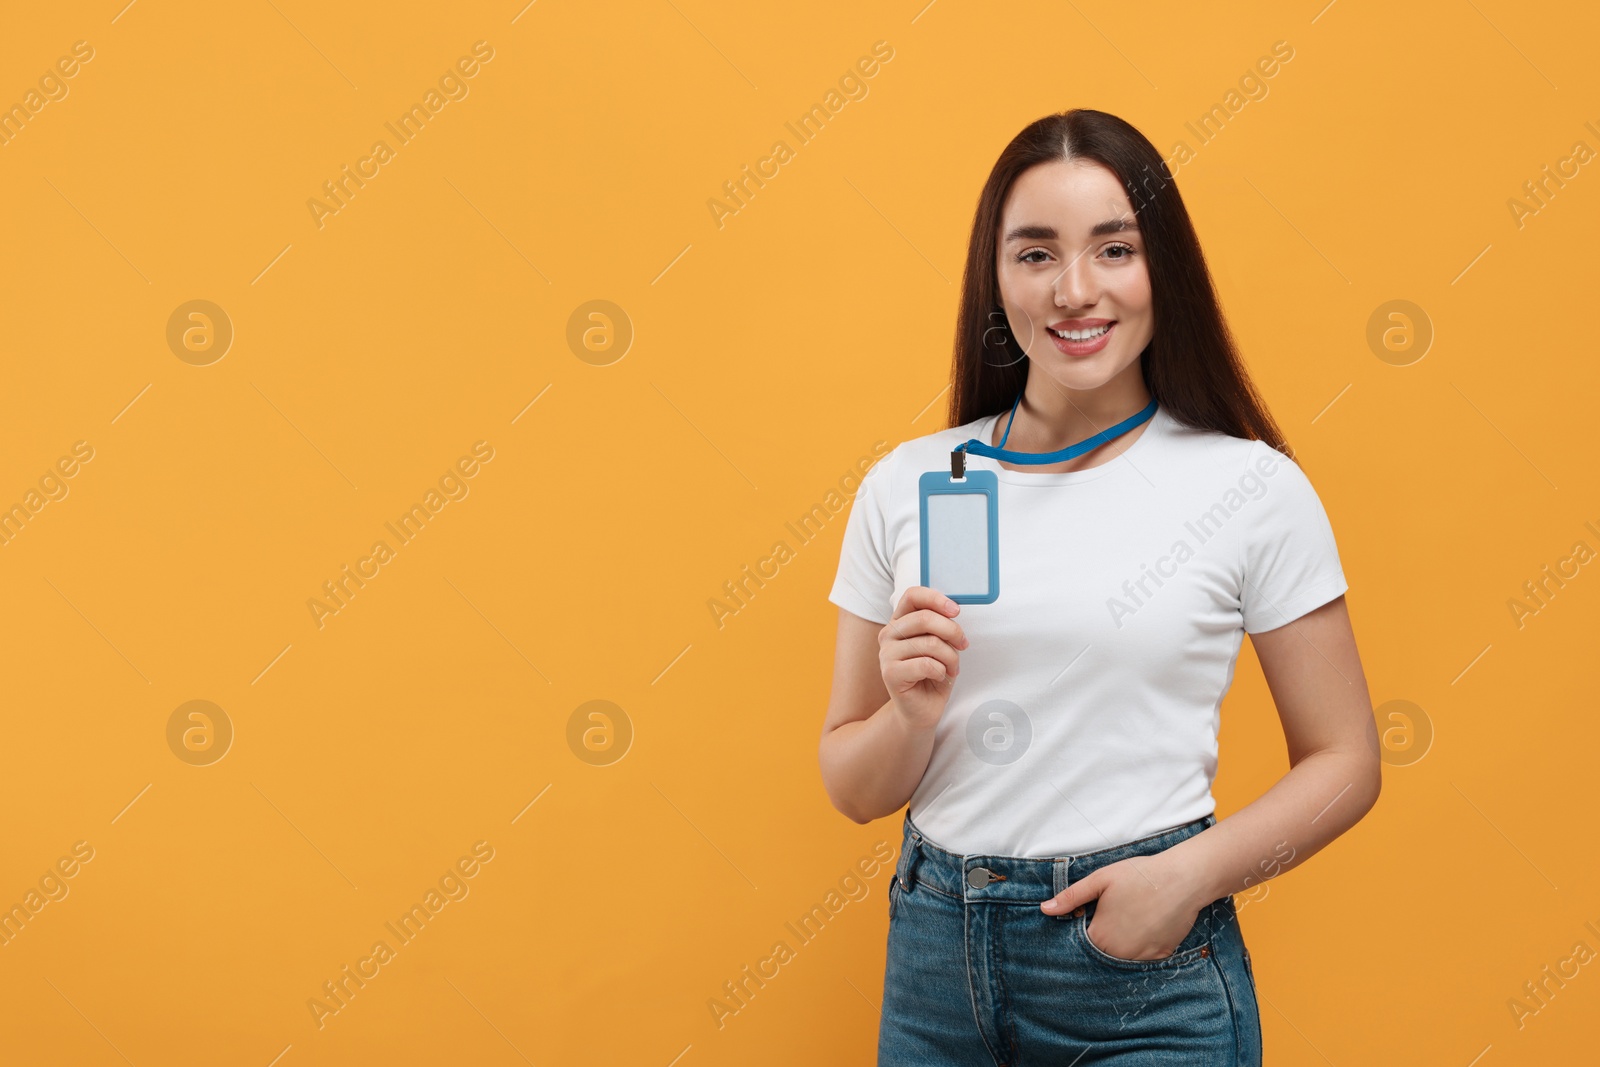 Photo of Happy woman with vip pass badge on orange background. Space for text